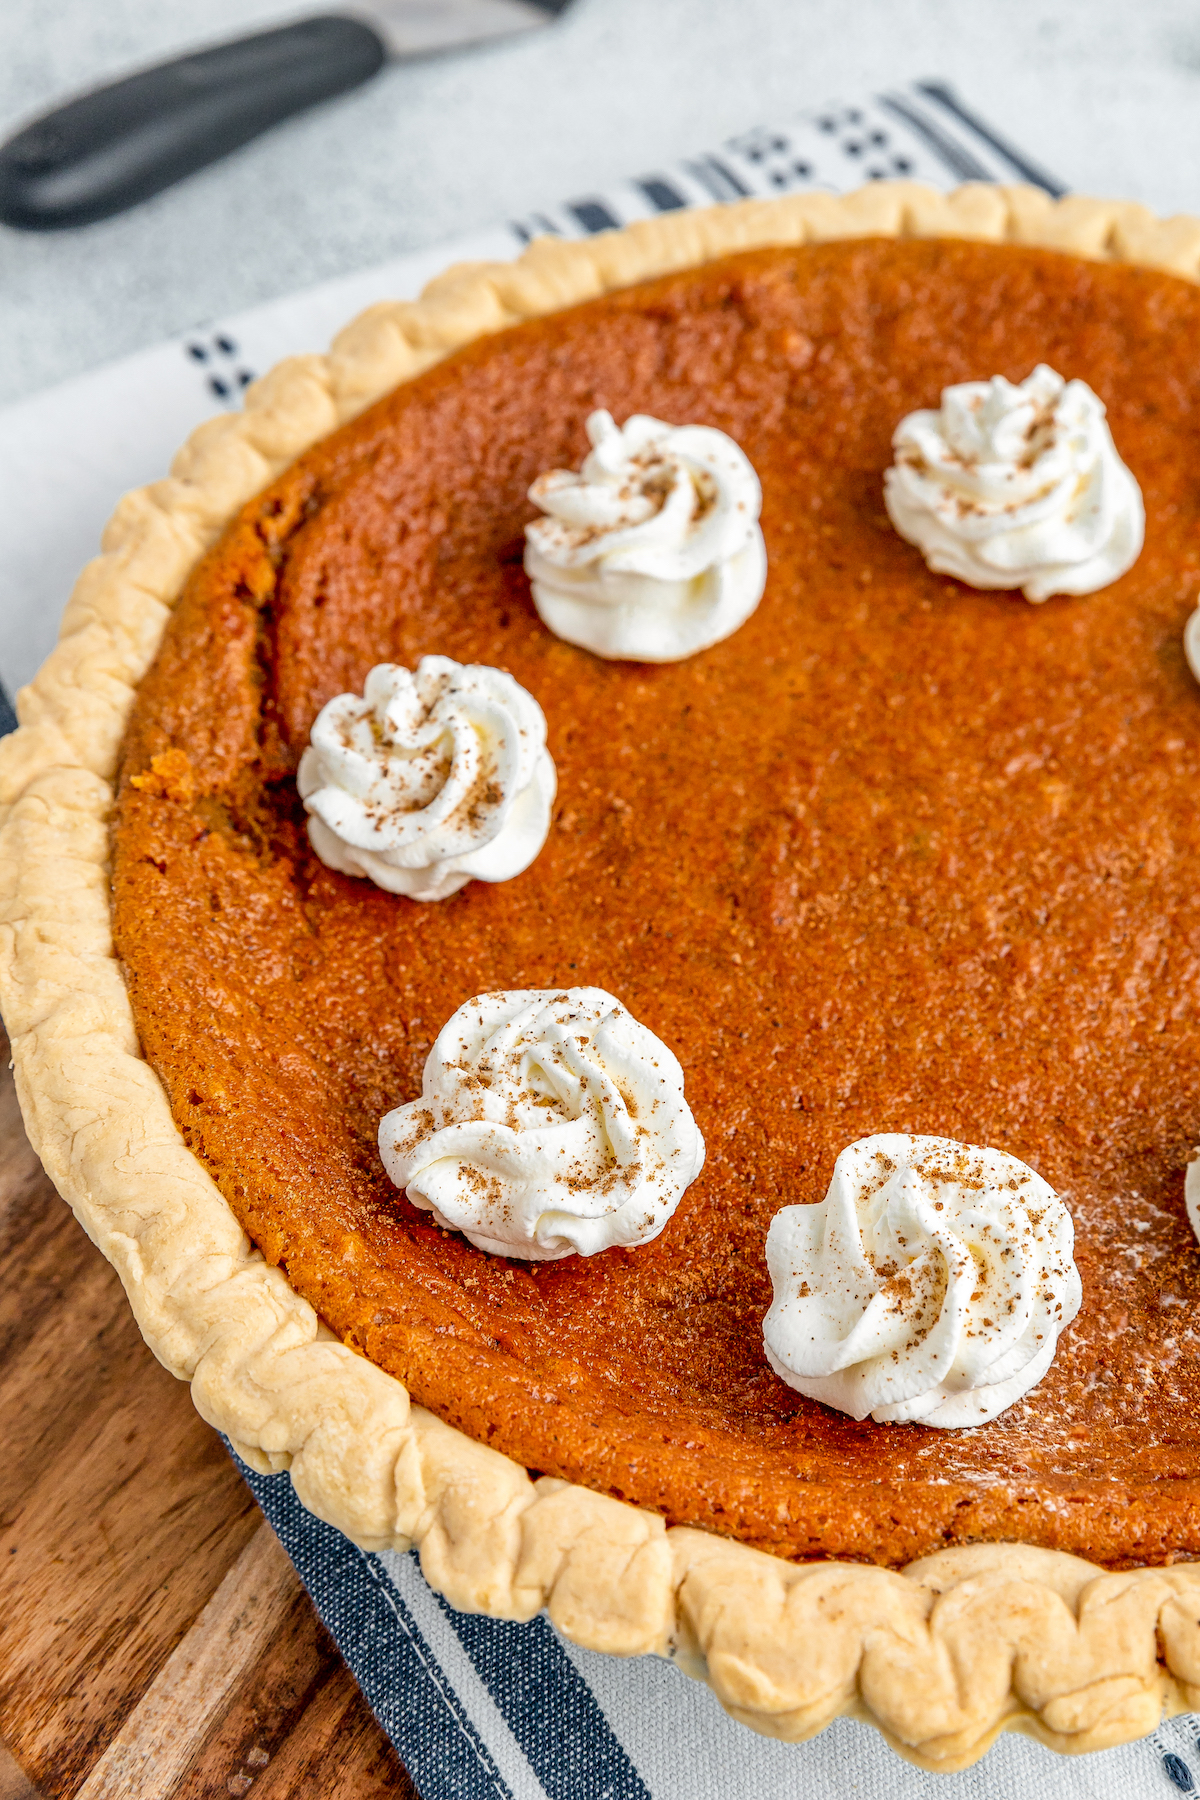 A fully baked pie garnished with whorls of whipped cream.